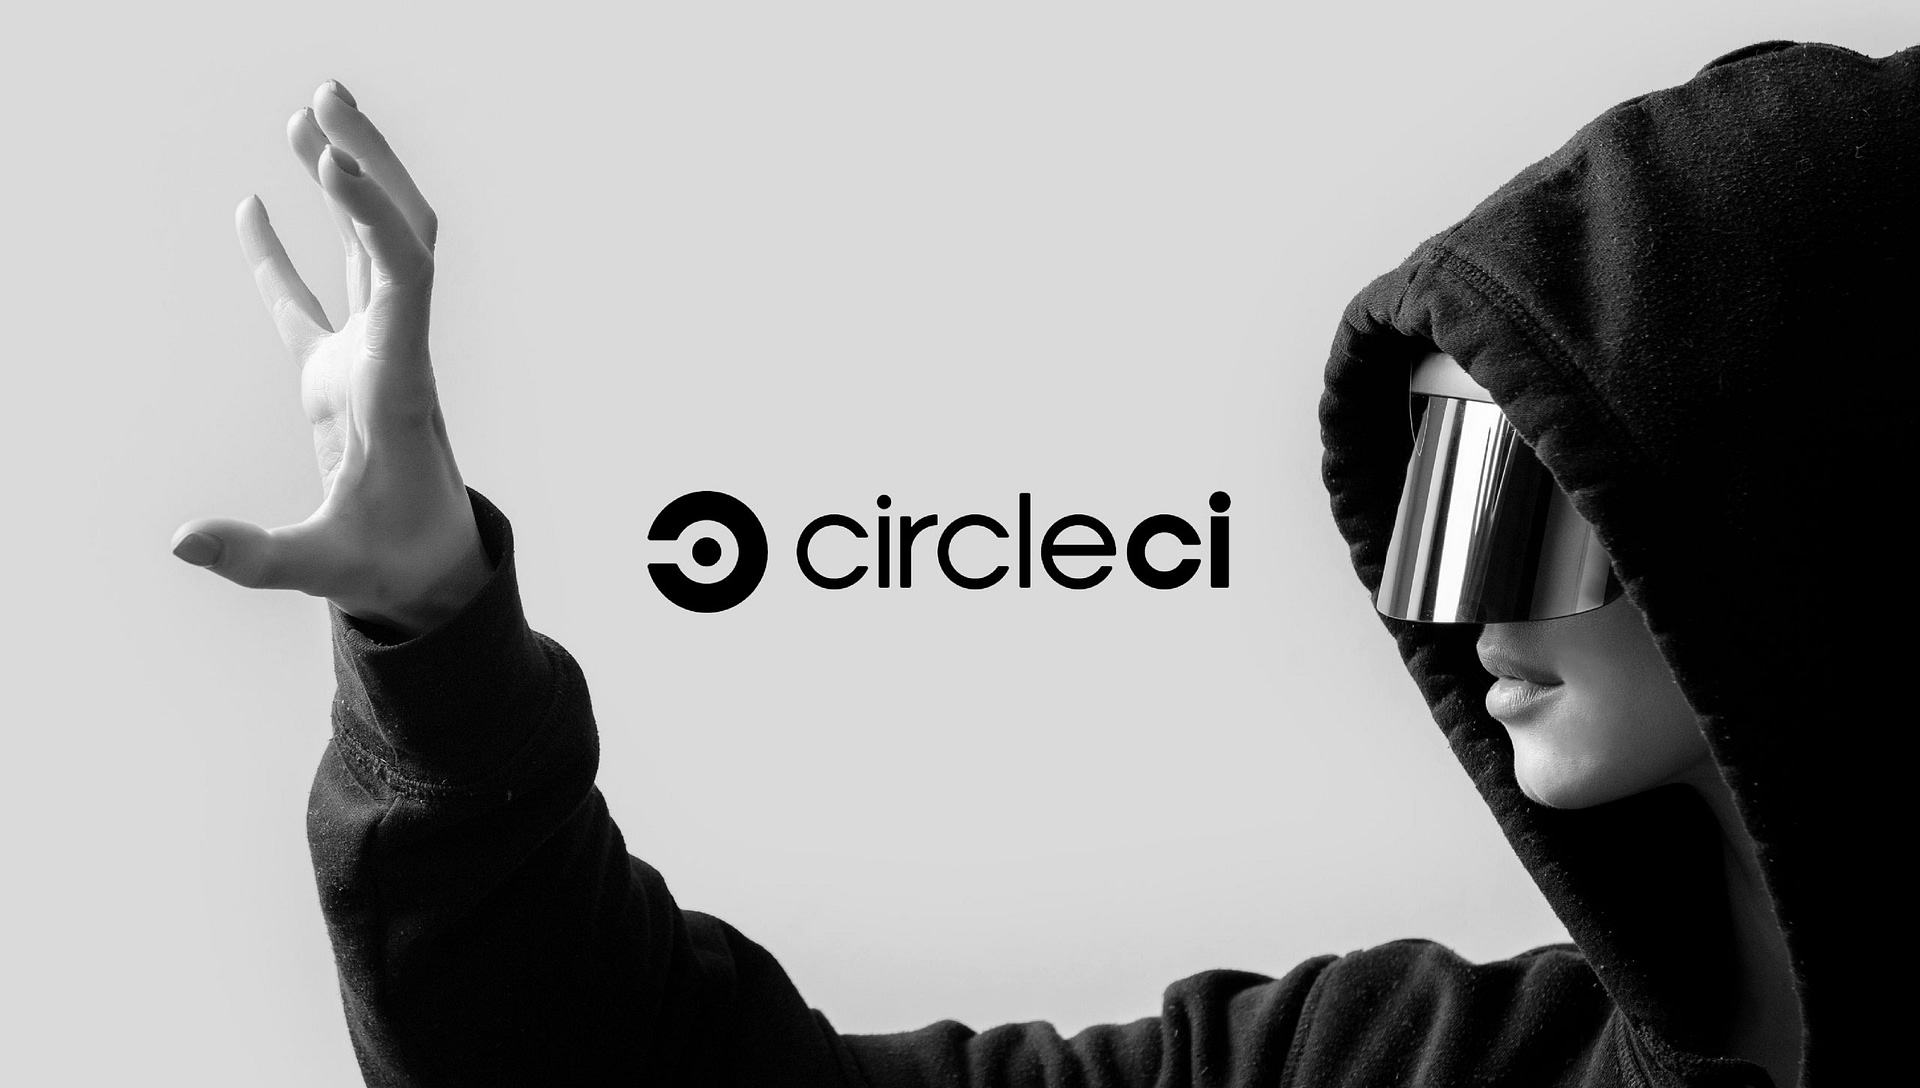 CircleCi 2fa  session cookie info-stealing malware